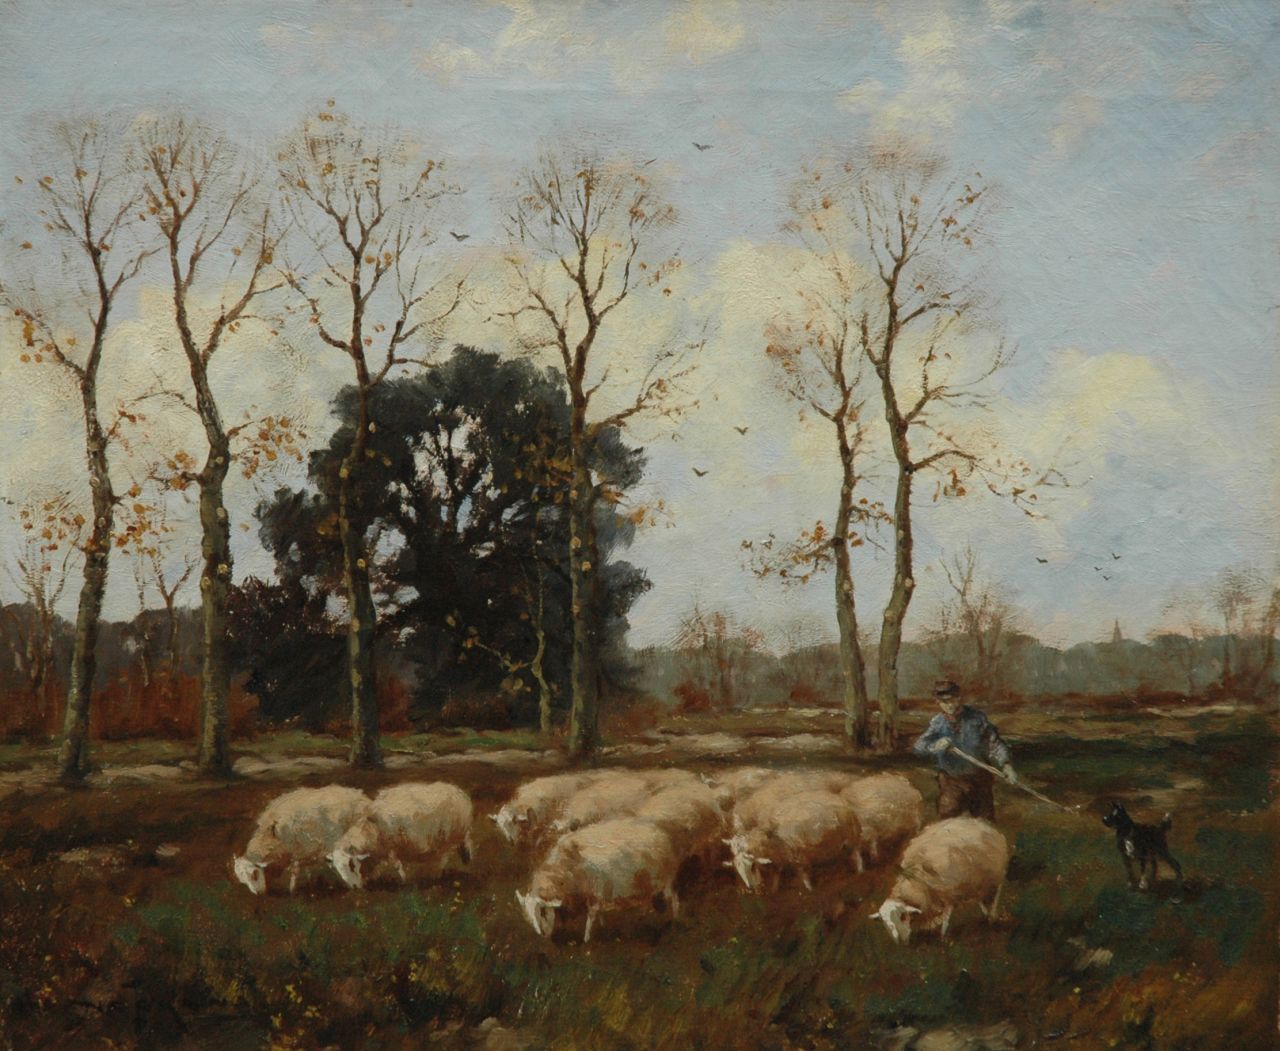 Nefkens M.J.  | Martinus Jacobus Nefkens, Shepherd with his dog and sheep, oil on canvas 50.0 x 61.0 cm, signed l.l.